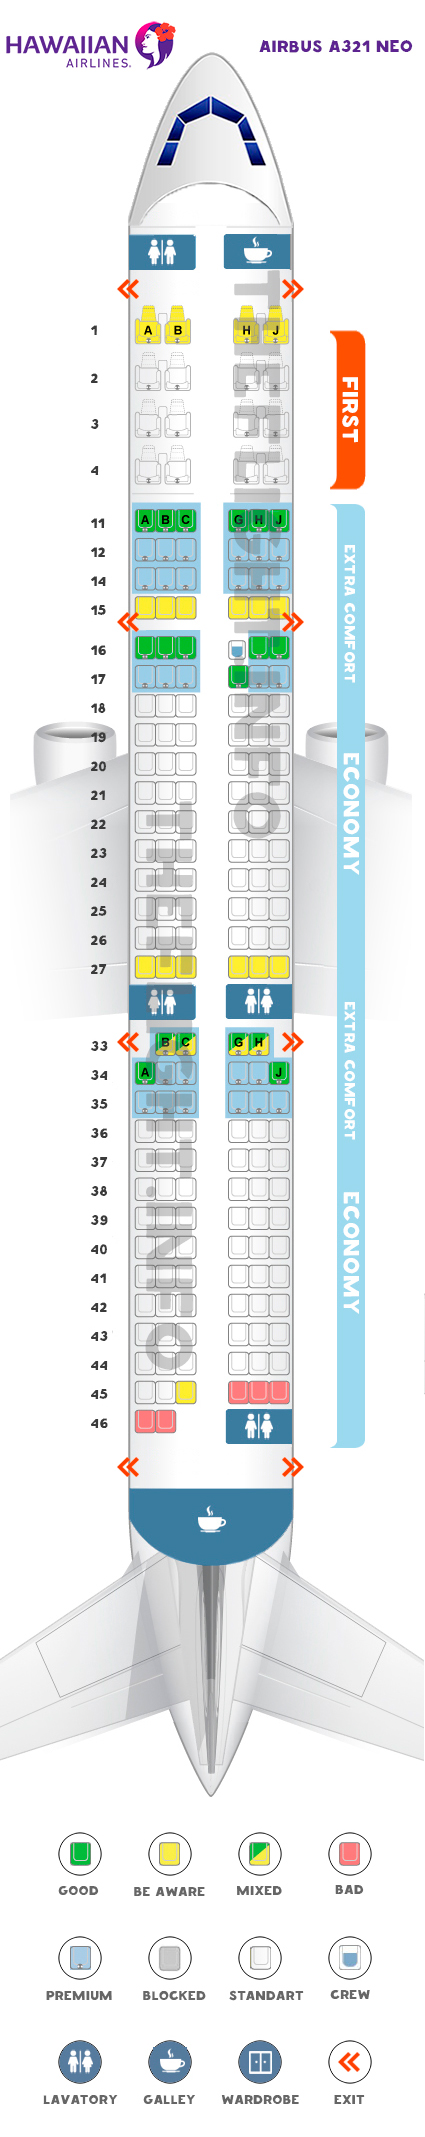 Seat map Airbus A321neo "Hawaiian Airlines". Best seats in the plane